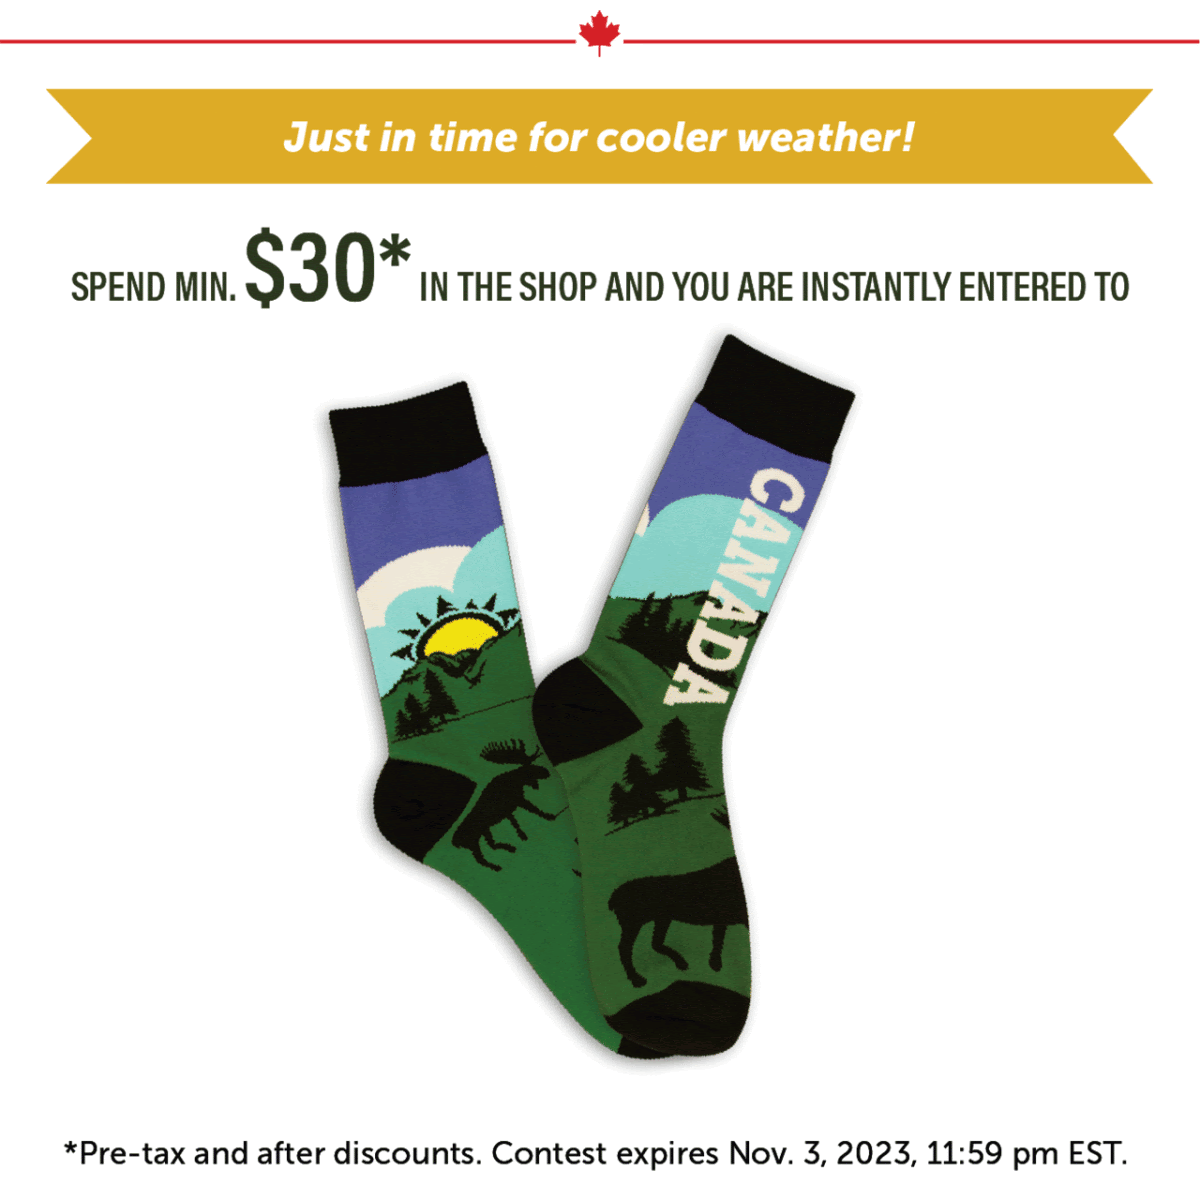 Spend $30 in the shop and win a pair of socks